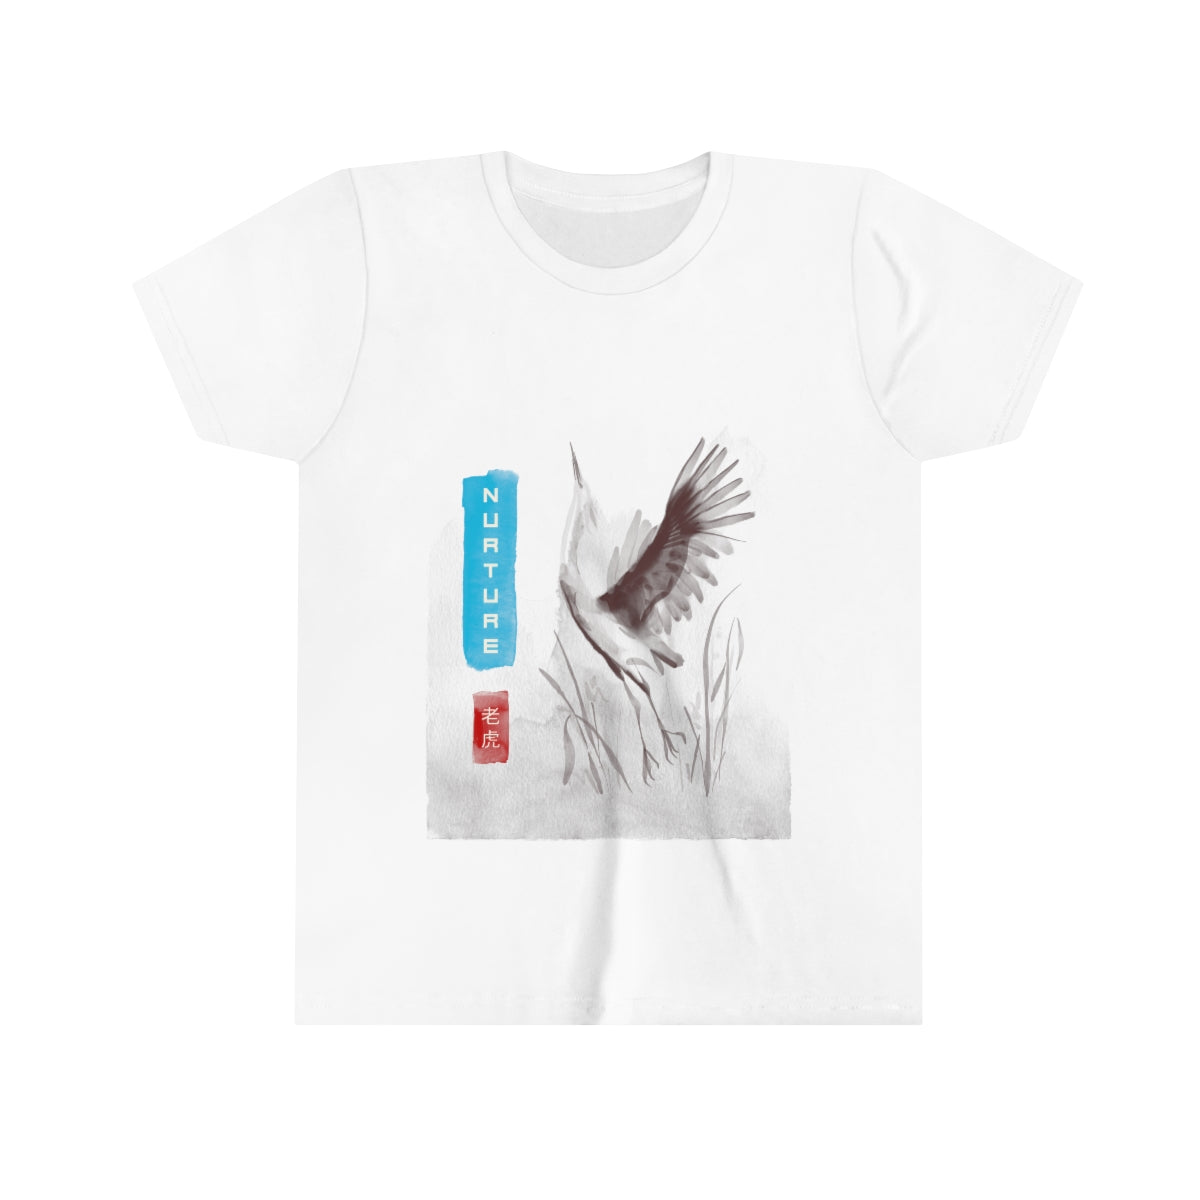 Youth Family Proclamation Nurture Shirt with Crane - Short Sleeve Tee